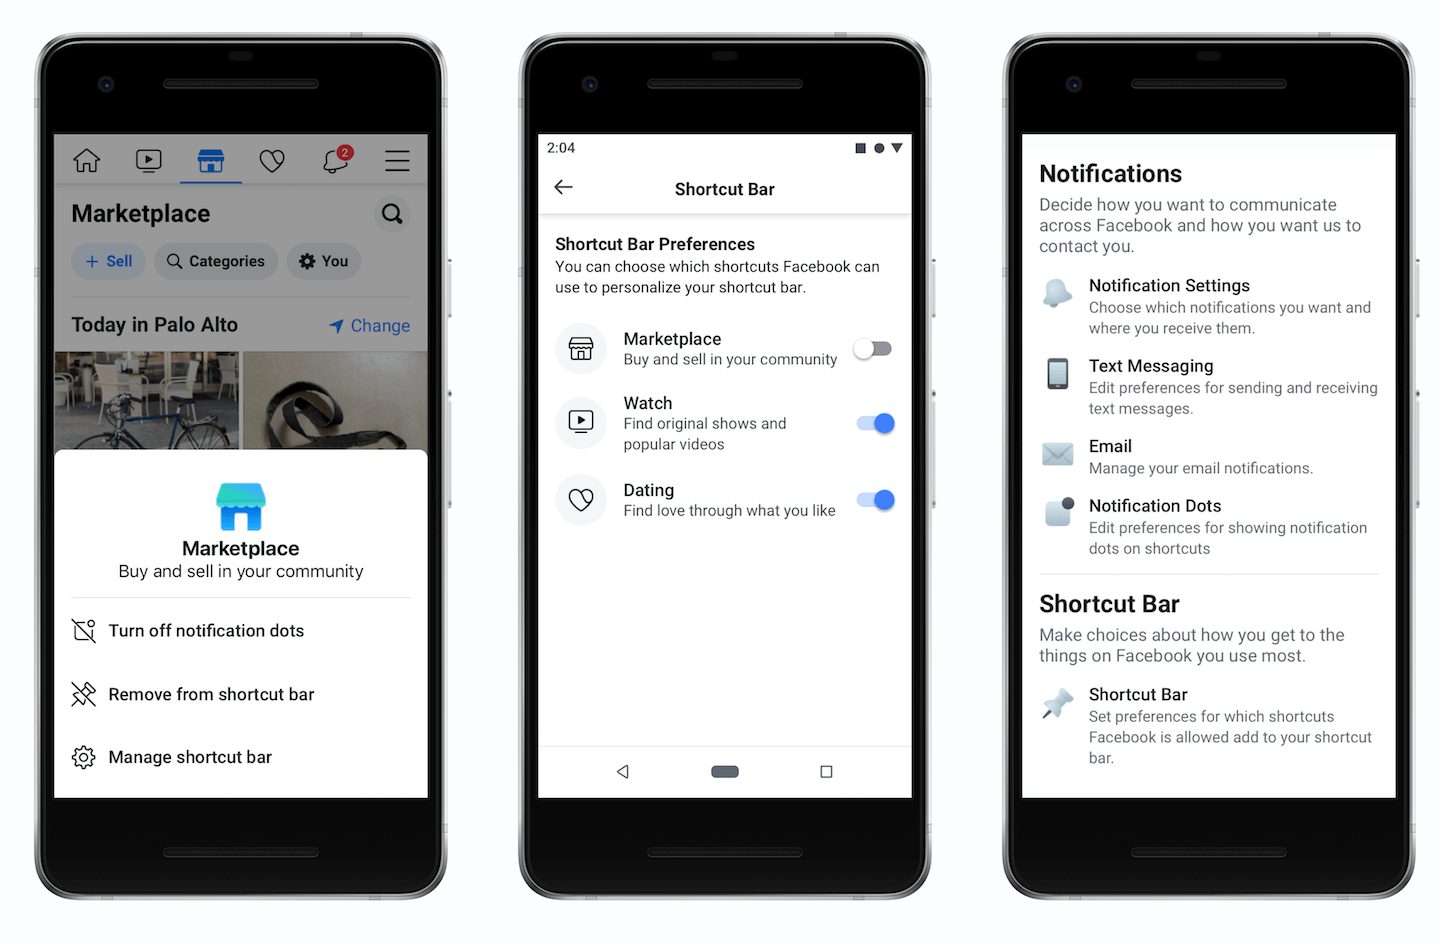 Facebook will now let users reduce the clutter from the app's navigation bar